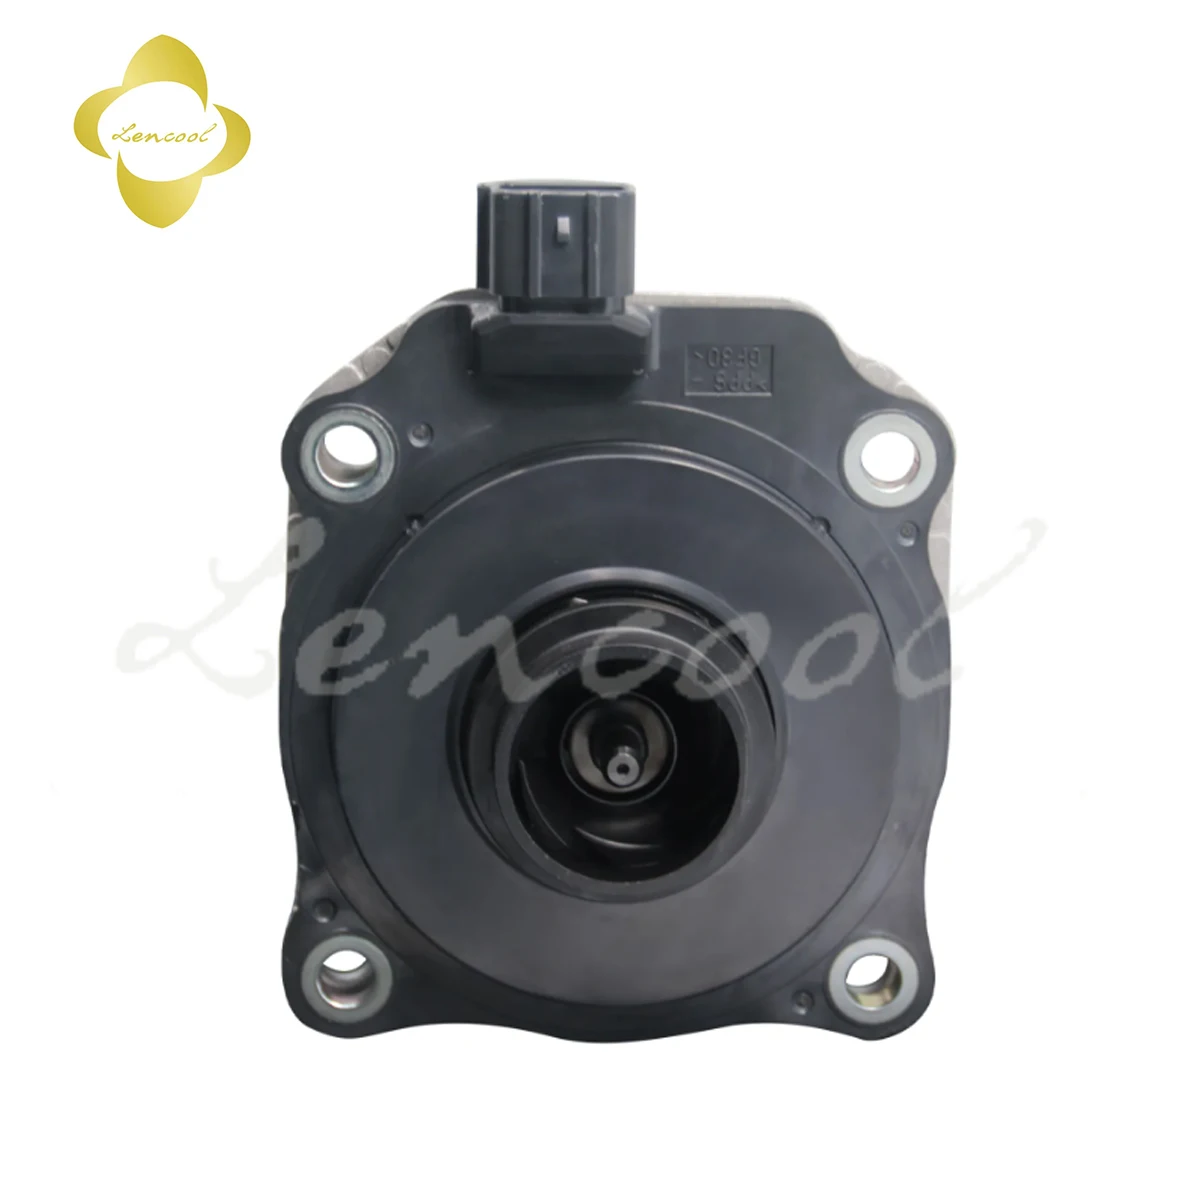 

New Electronic Cooling Auxiliary Water Pump For Toyota Camry LEXUS ES300h Avalon Hybrid RAV4 16032-25010